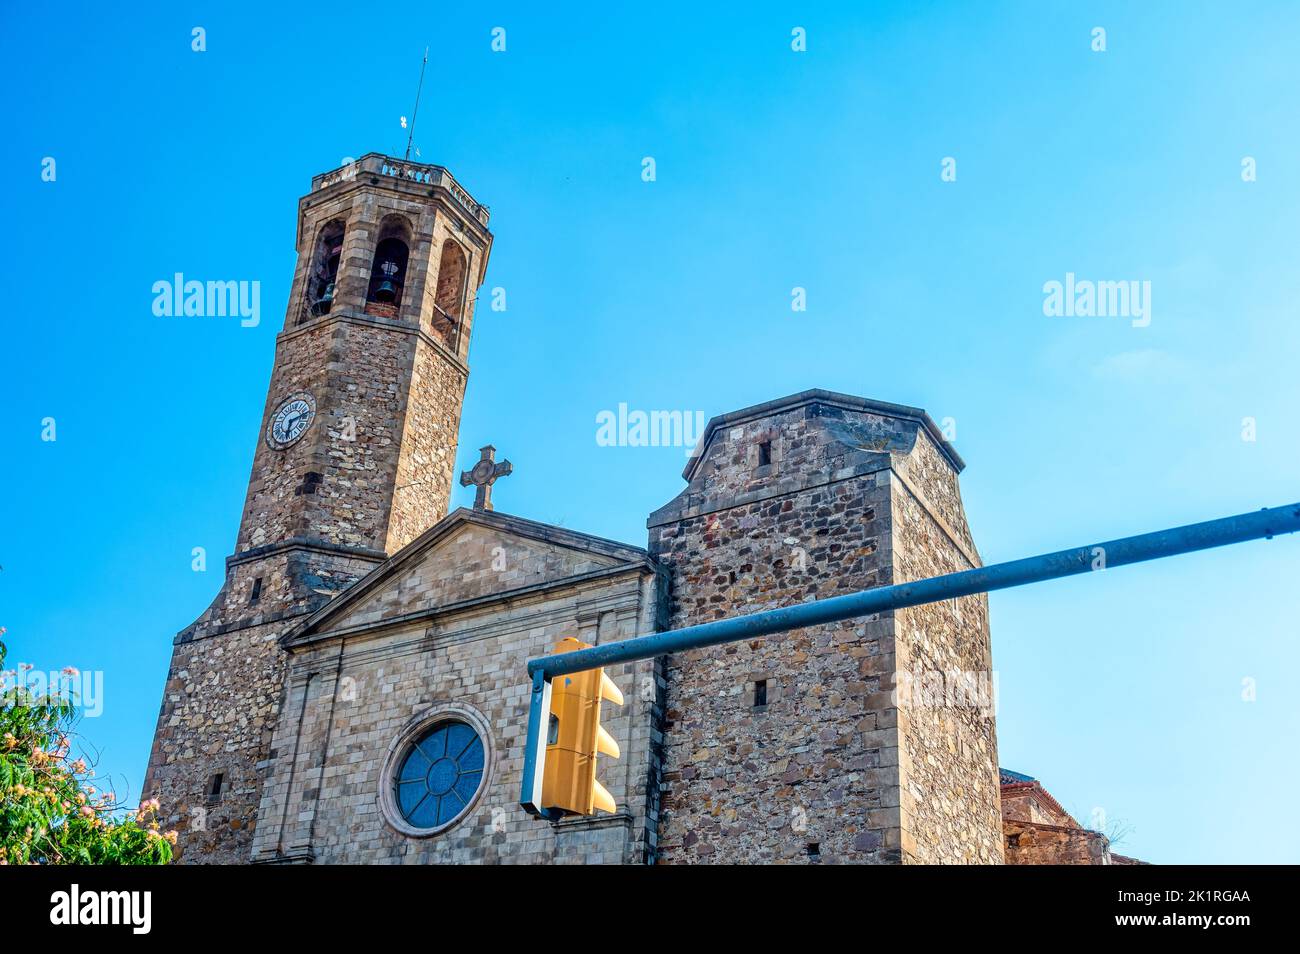 Catholic Church San Vicente de Sarria. Medieval architecture in a building with stone walls and a tower. Stock Photo